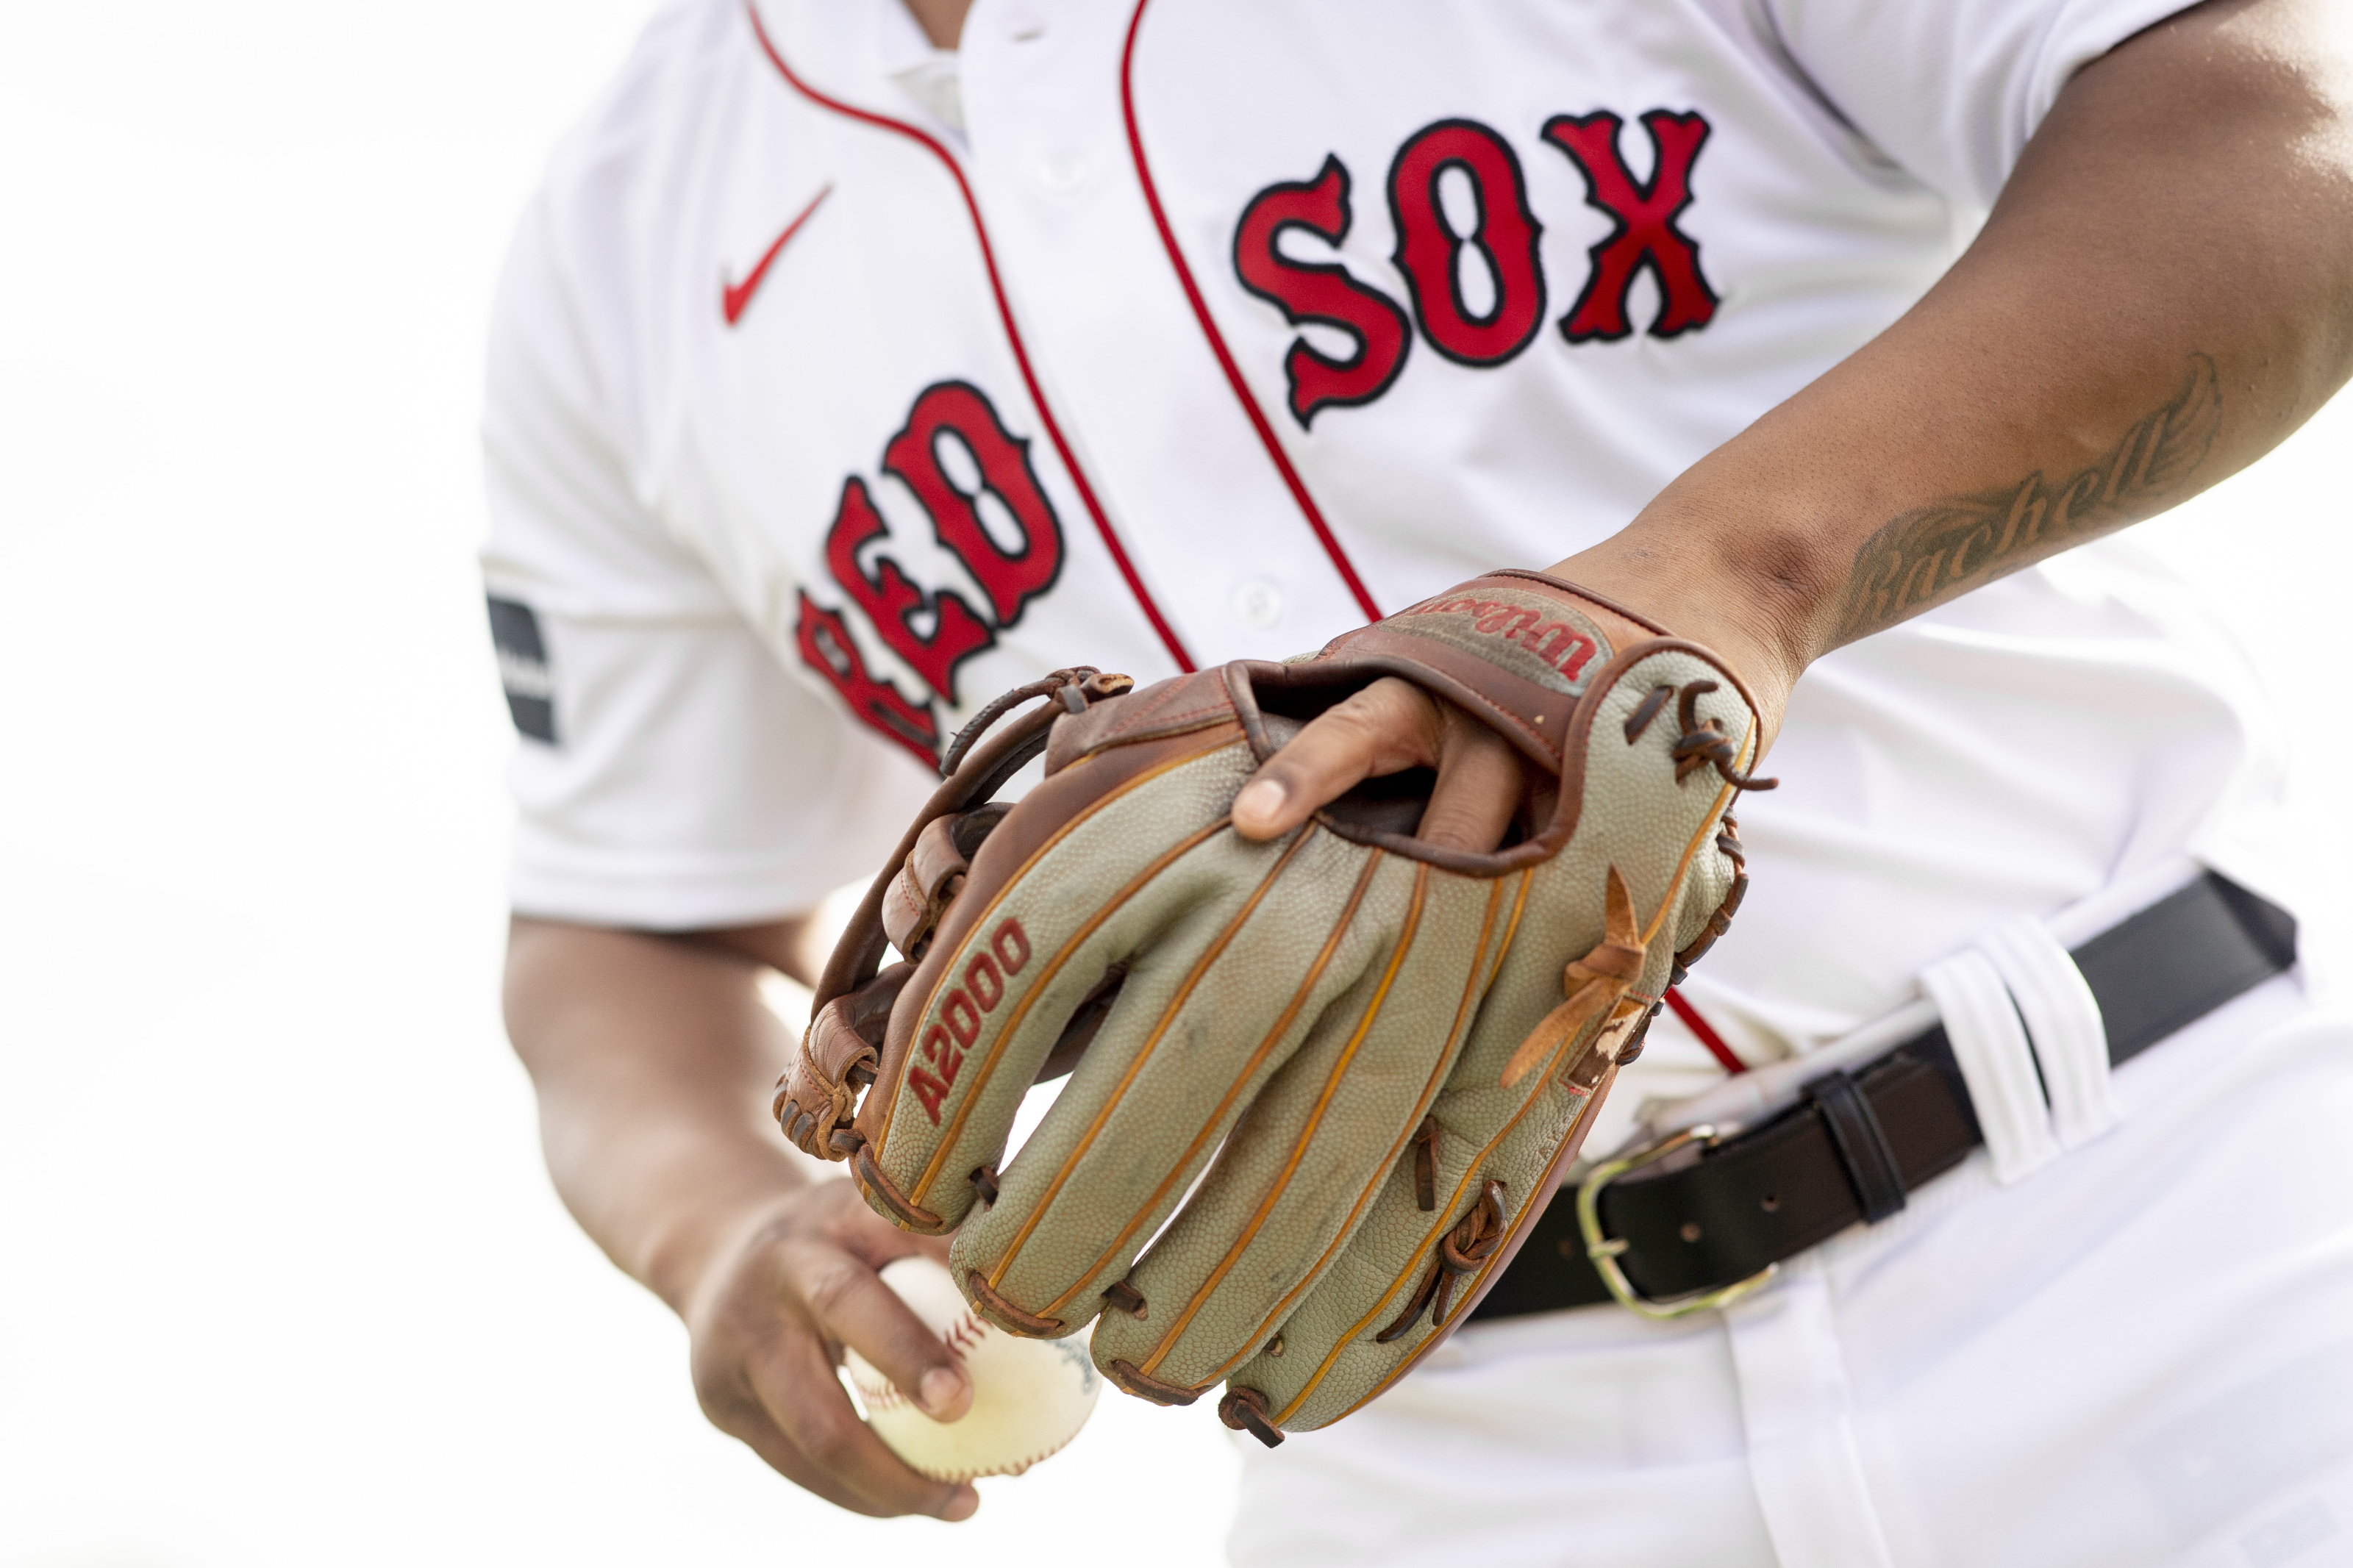 Boston Red Sox 2023 Opening Day lineup projection & predictions